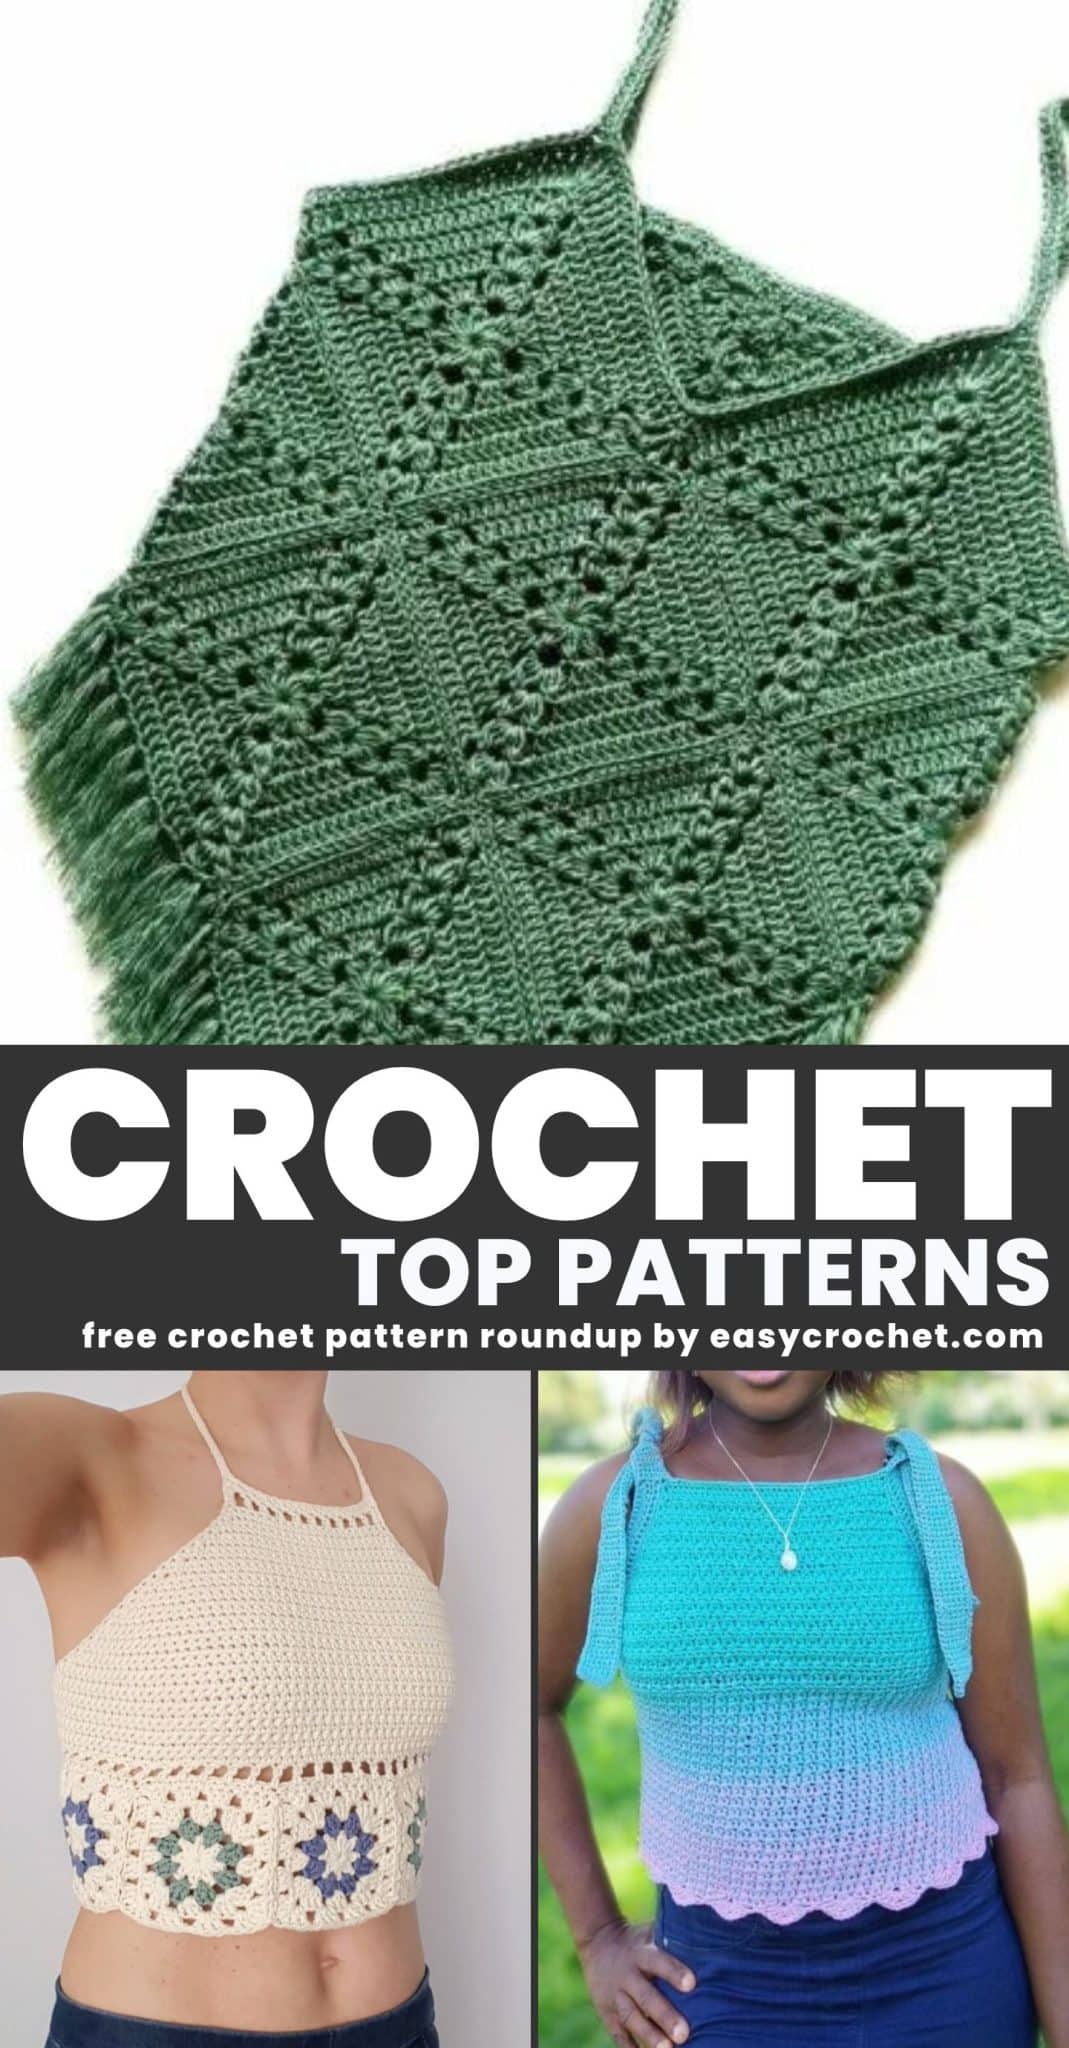 Easy Crochet Crop Top Tutorial: Create Your Own Stylish T-shirt!